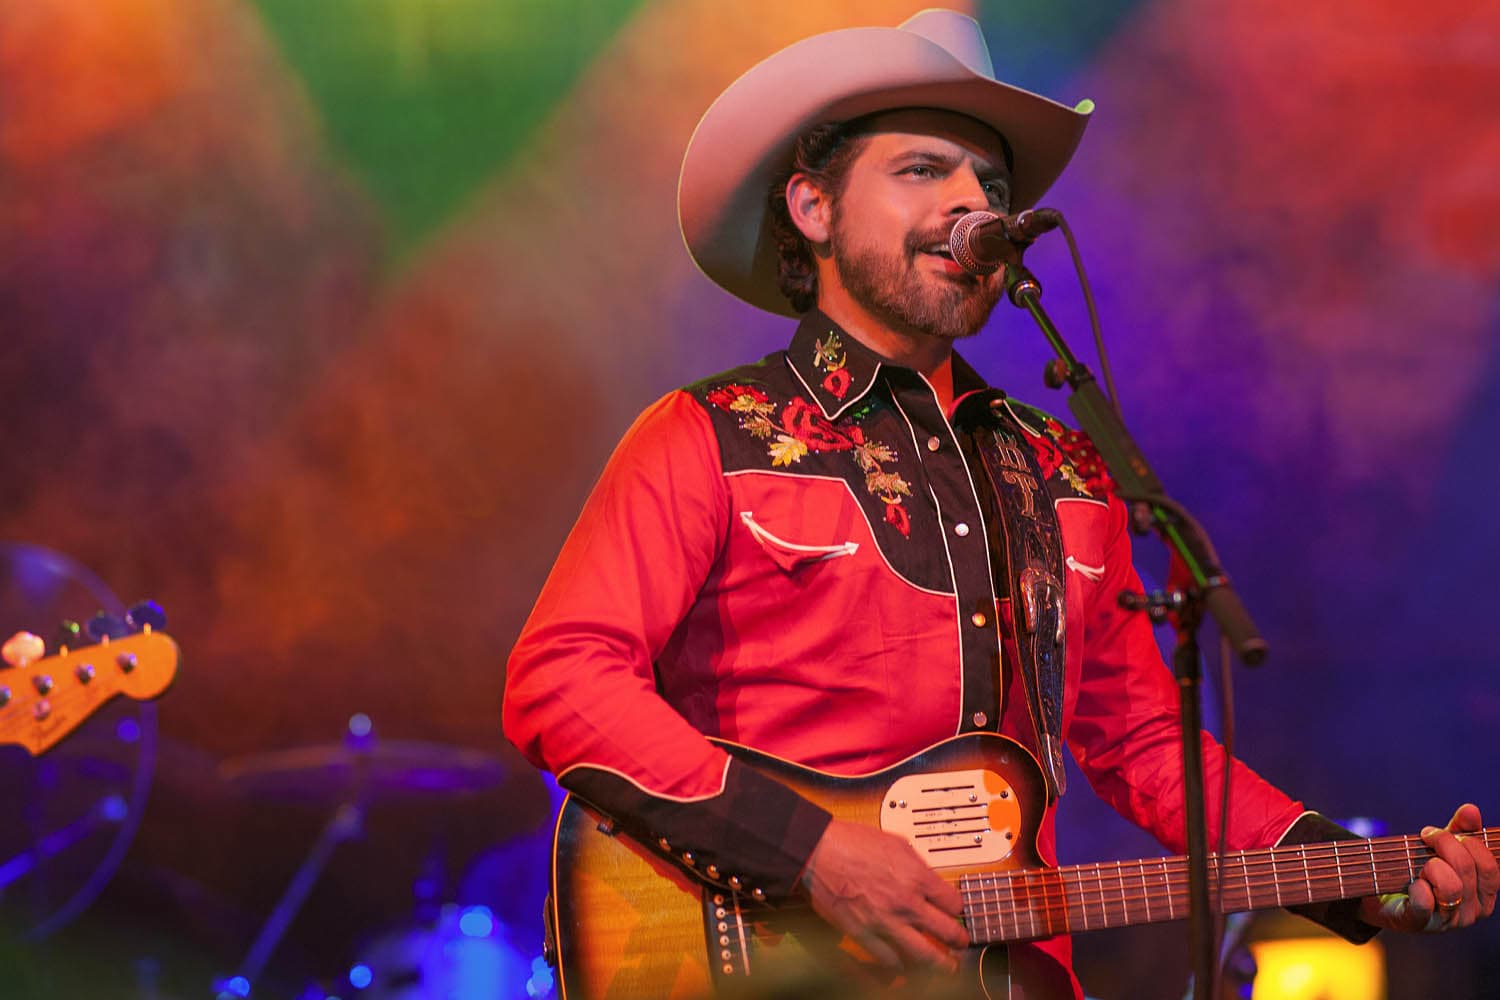 Country Music Star Rick Trevino Sings About LatinAmerican